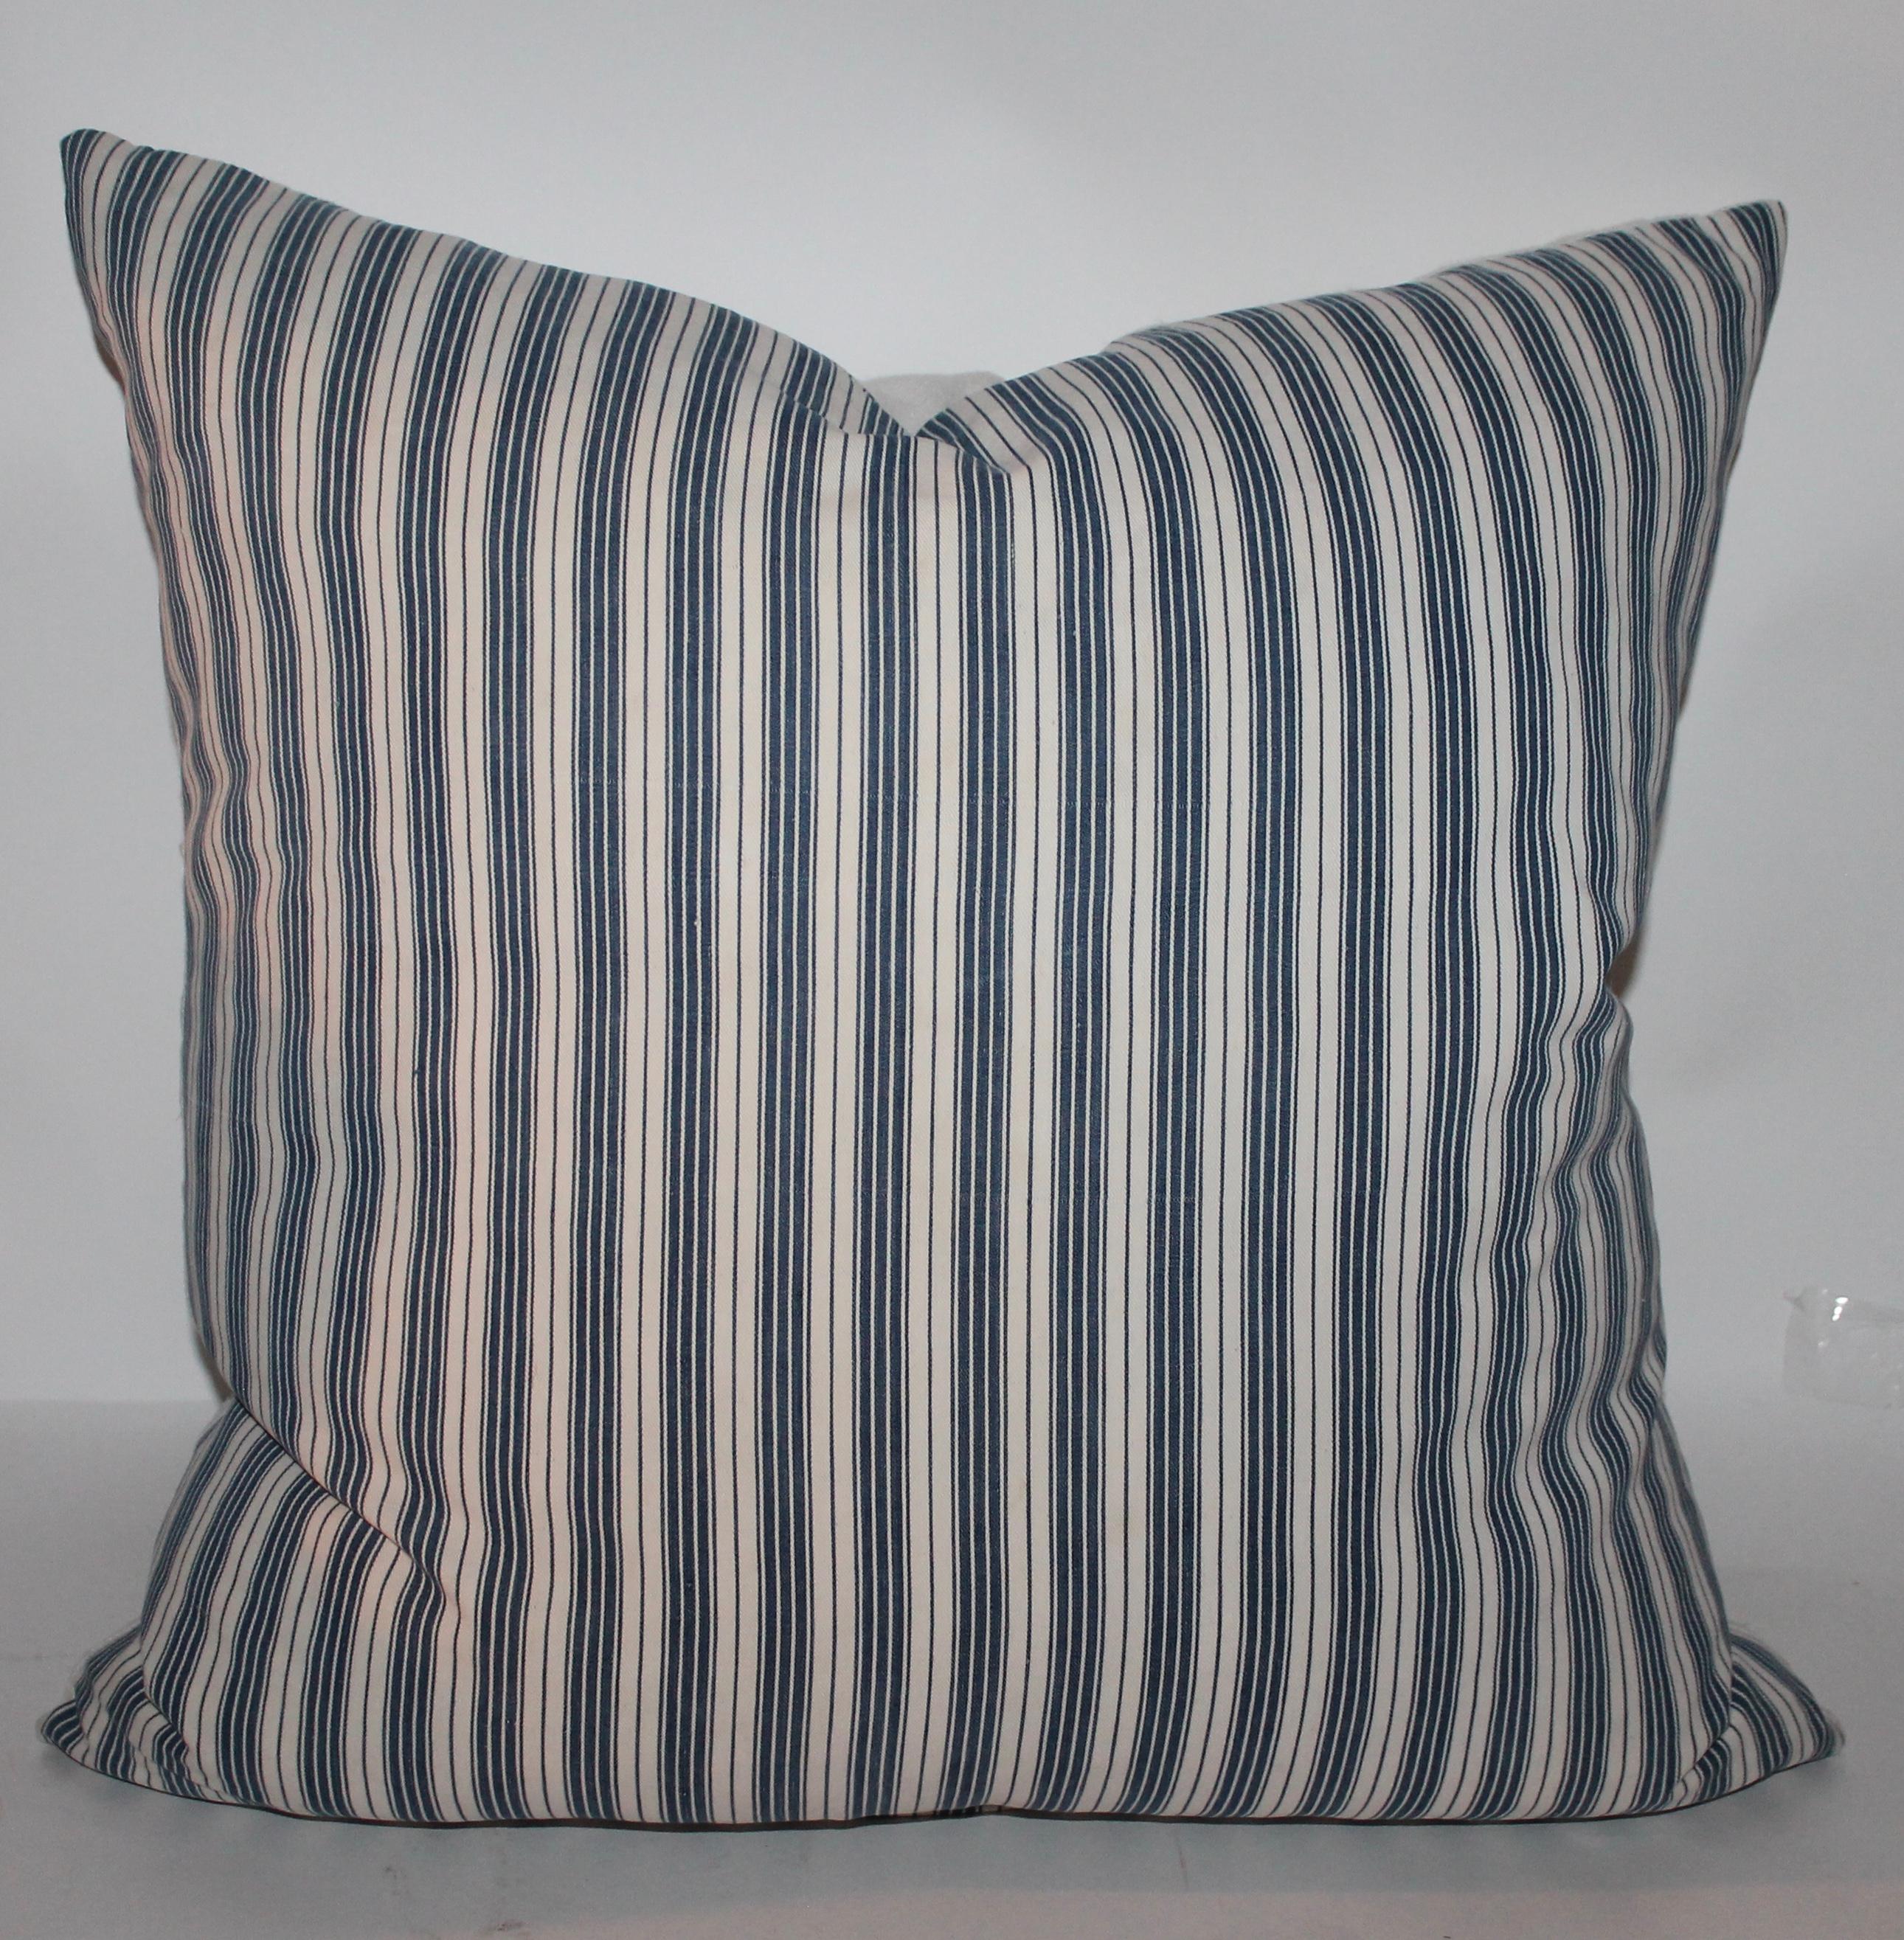 Were selling one pair and one large amazing 19th century blue and white ticking pillows with white linen homespun backings. All are down & feather fill.

Small pillows measure 20 x 20 -2
Large ticking pillow 22 x 22-1
 Selling the group as one